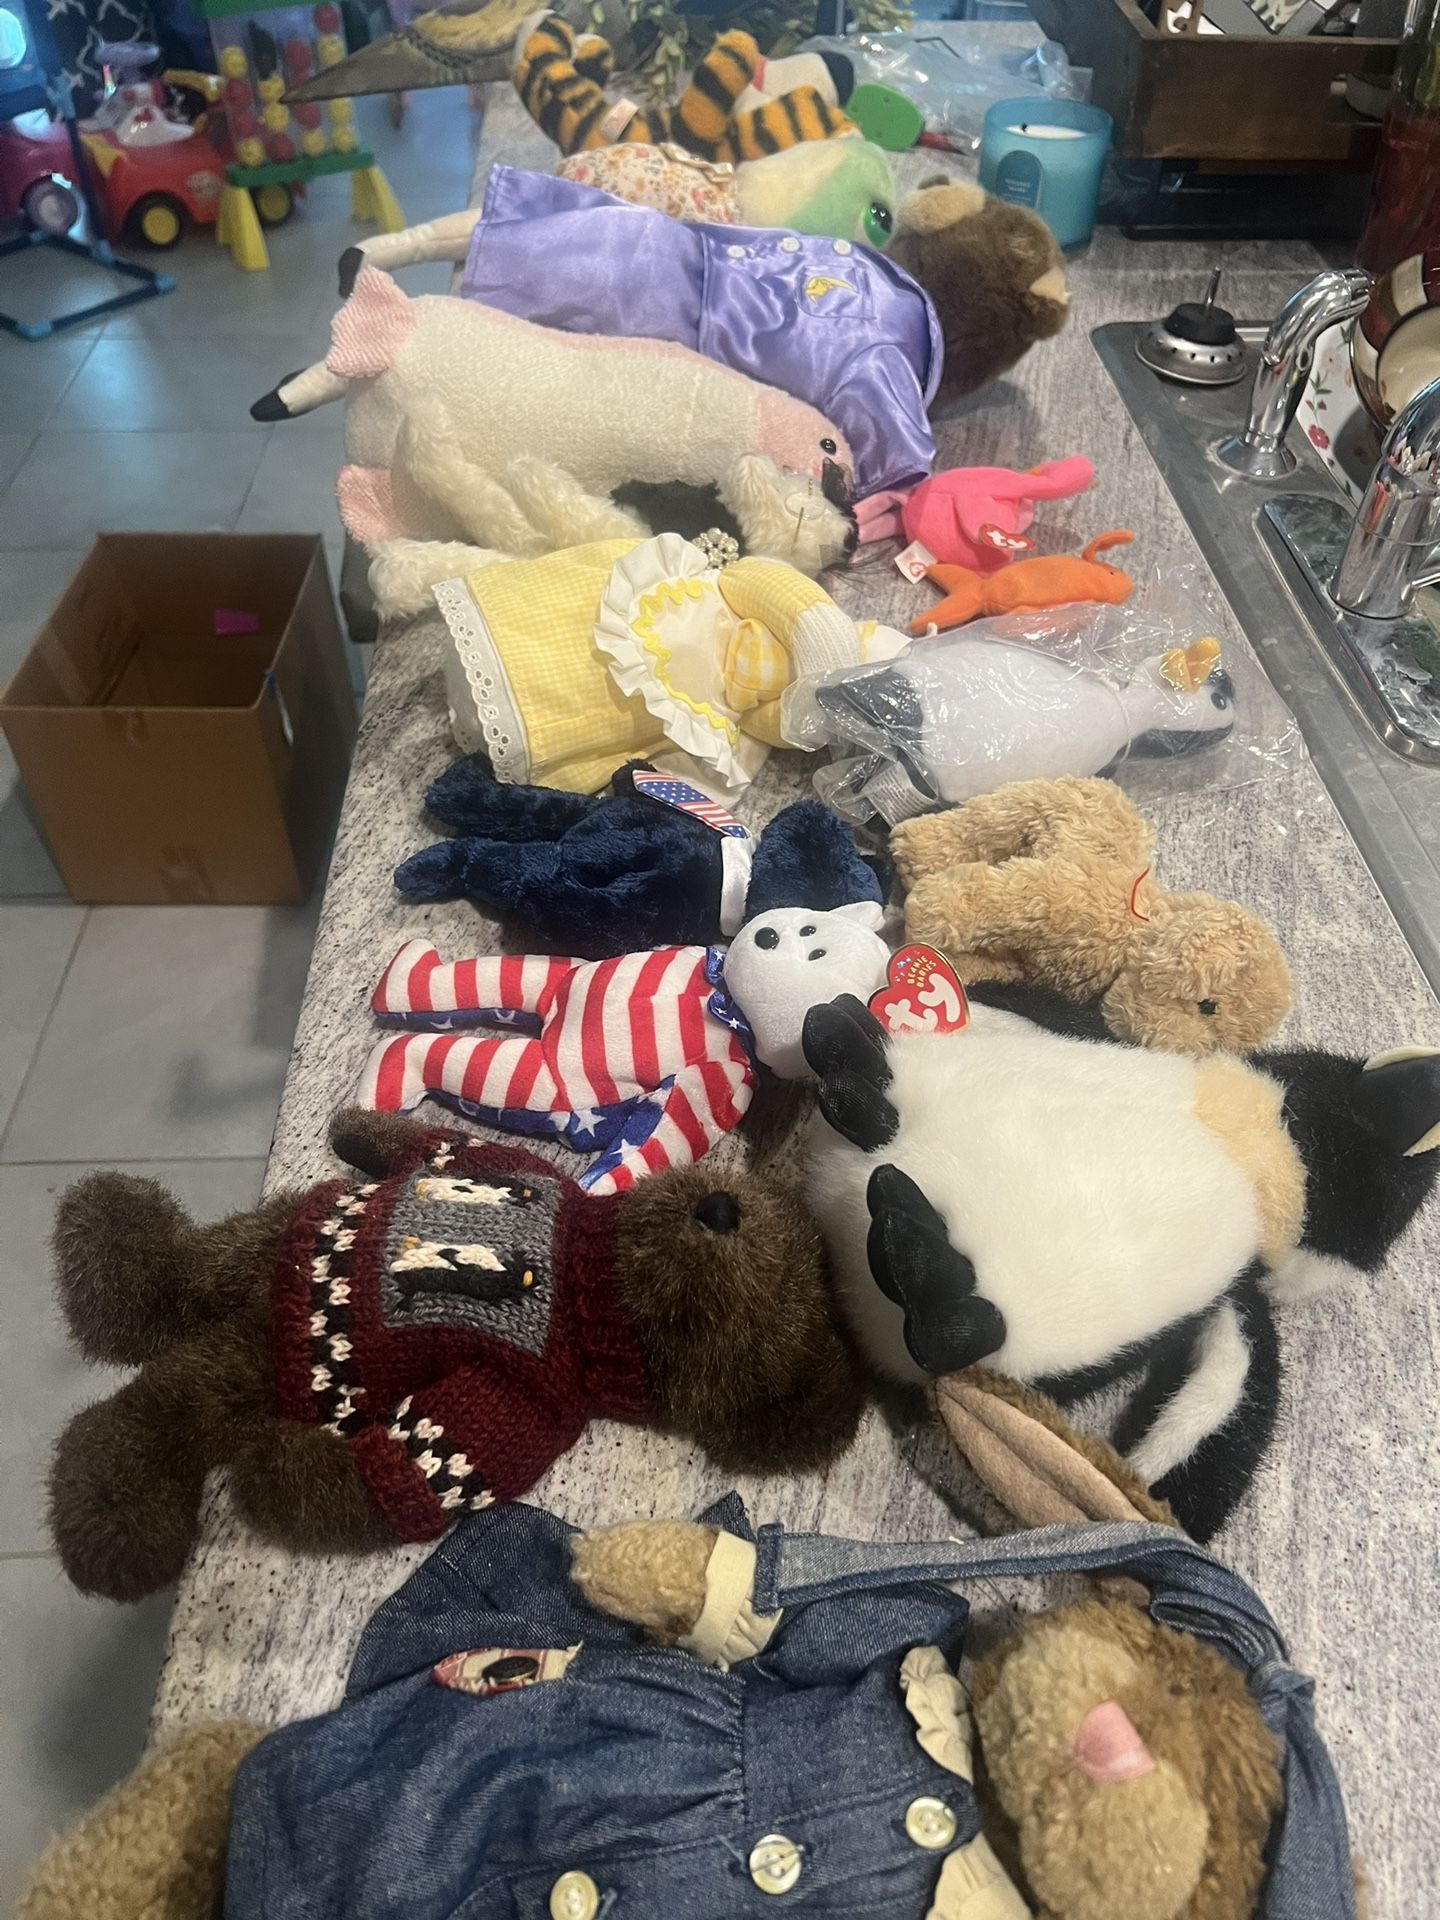 Vintage Plush Collection Including Eden, Boyd, And Beanie Babies 15 Total